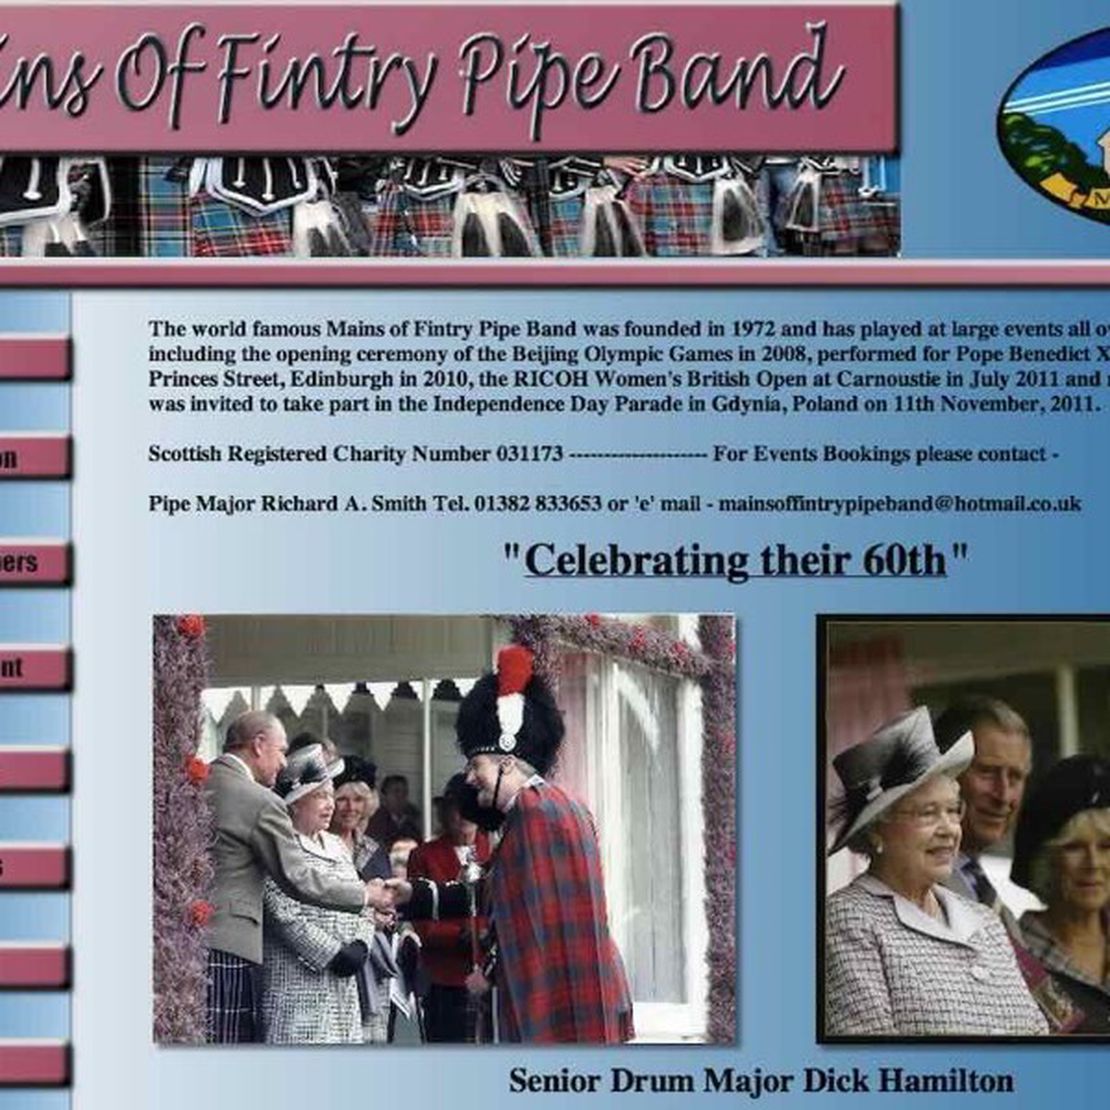 mains of fintry pipe band